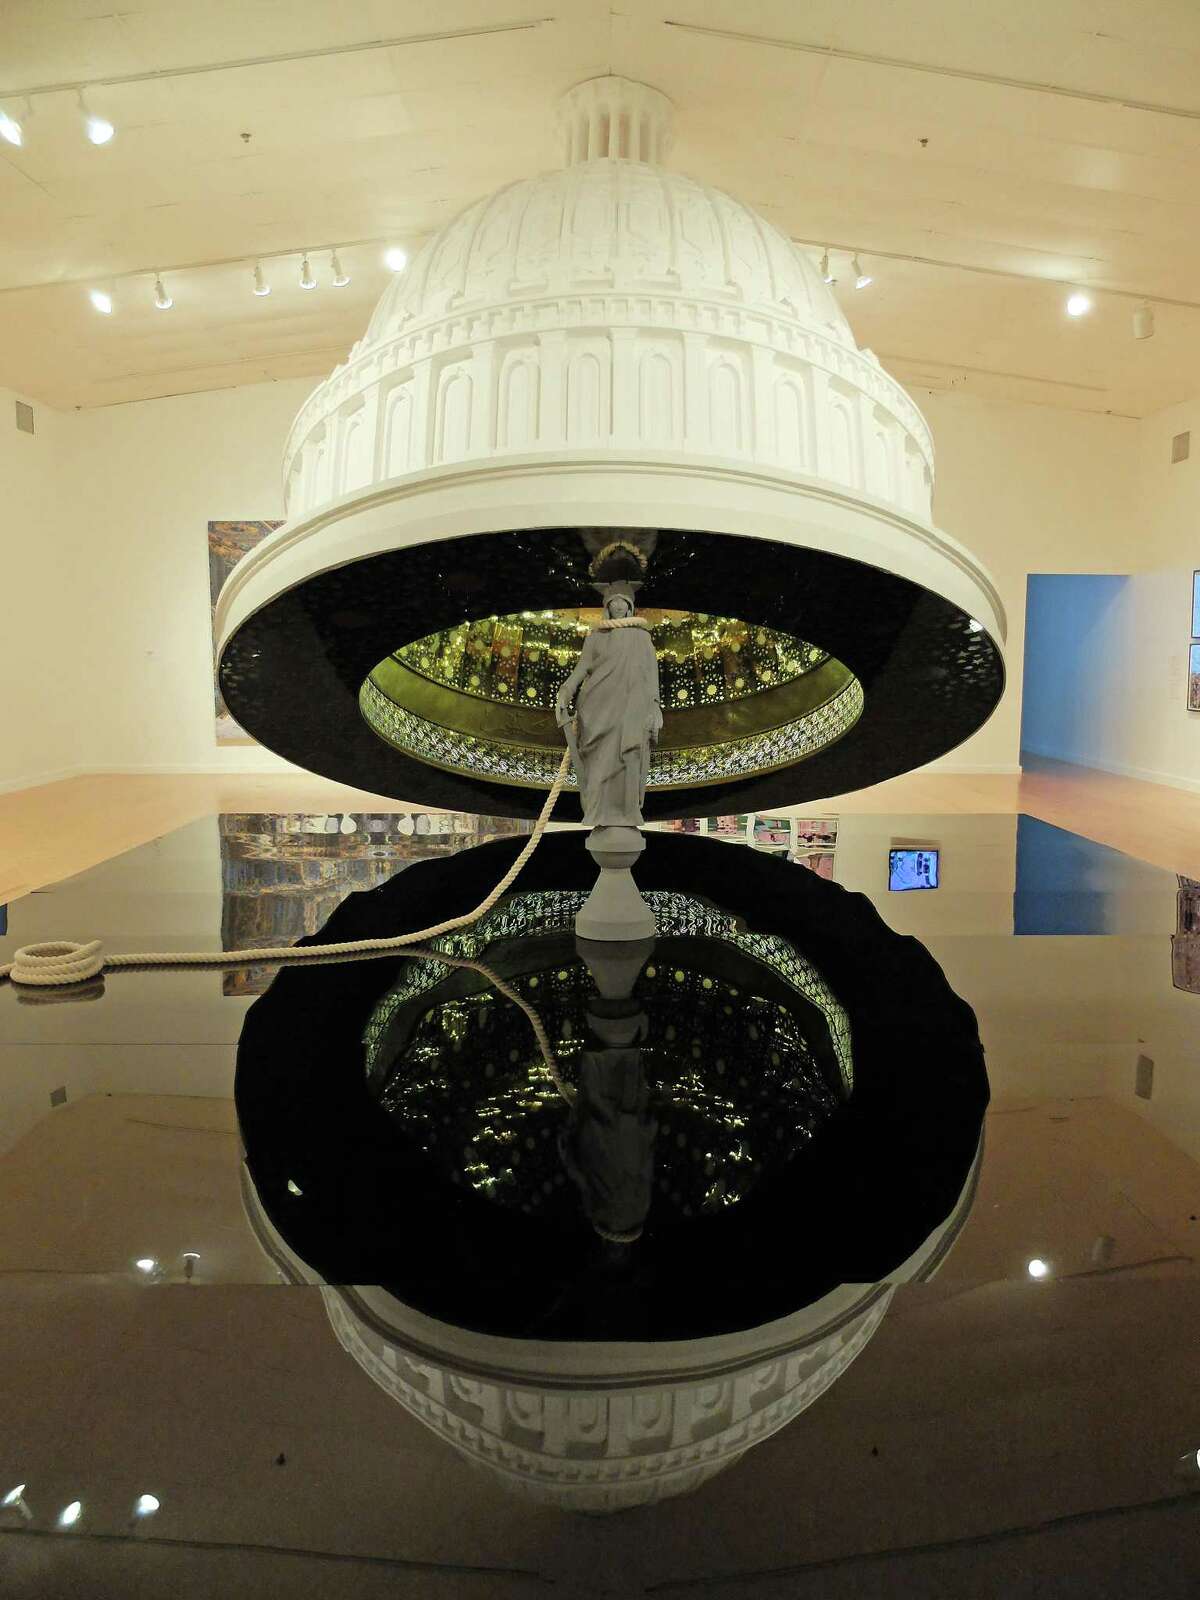 Abdulnasser Gharem's "The Capital Dome" dominates the center of the exhibition "Parallel Kingdom: Contemporary Art From Saudi Arabia," on view through Oct. 2 at the Station Museum of Contemporary Art.